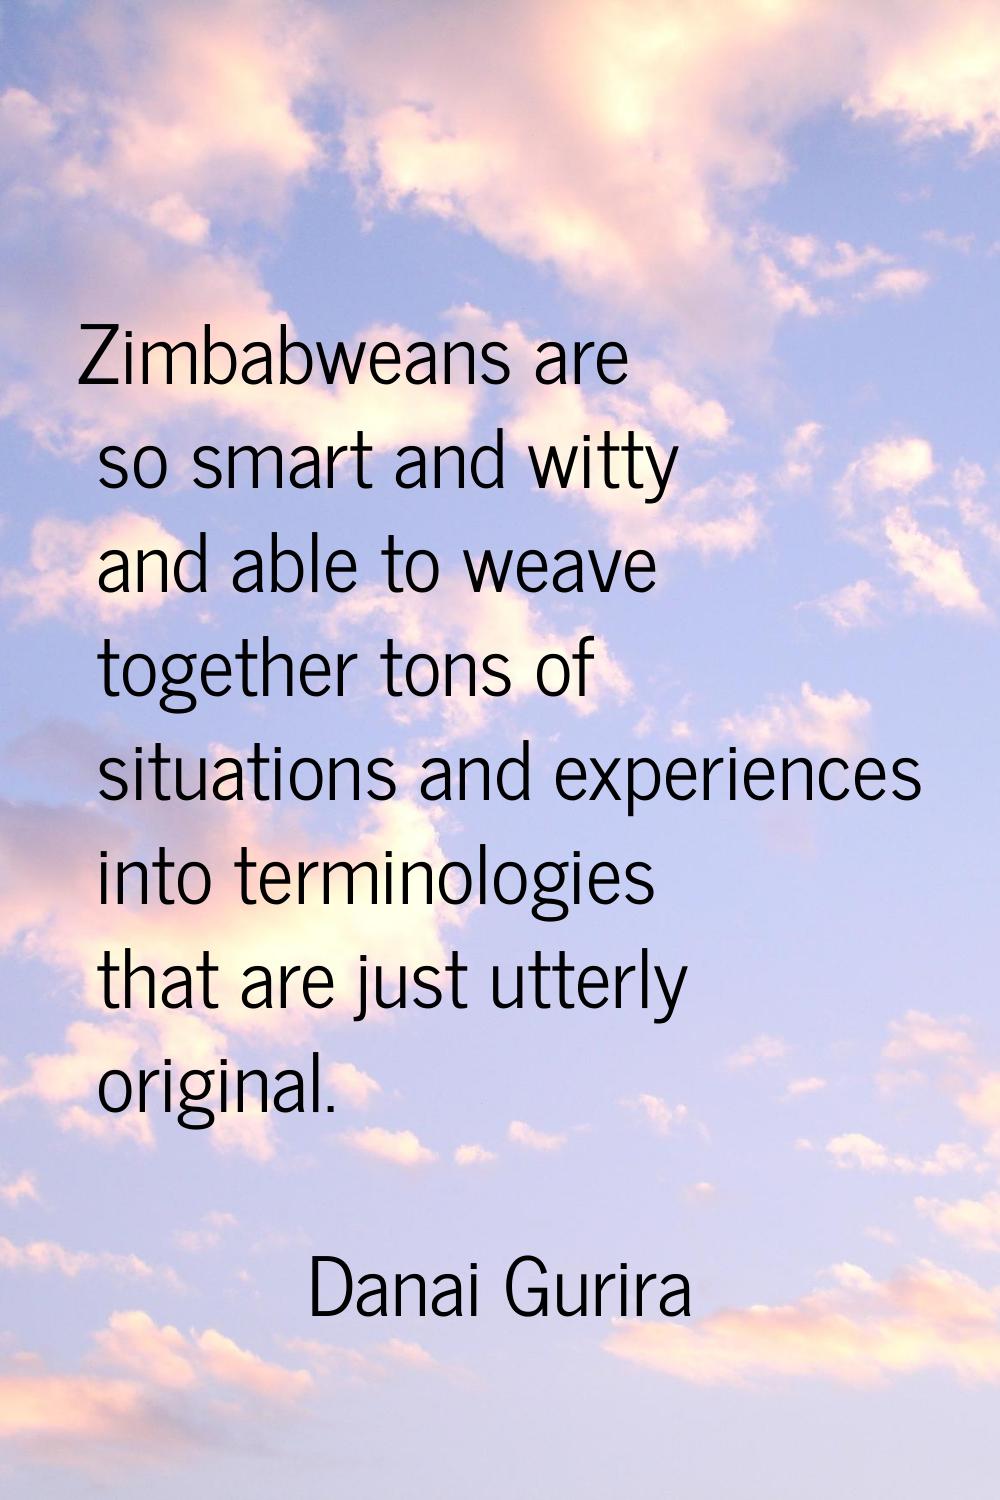 Zimbabweans are so smart and witty and able to weave together tons of situations and experiences in